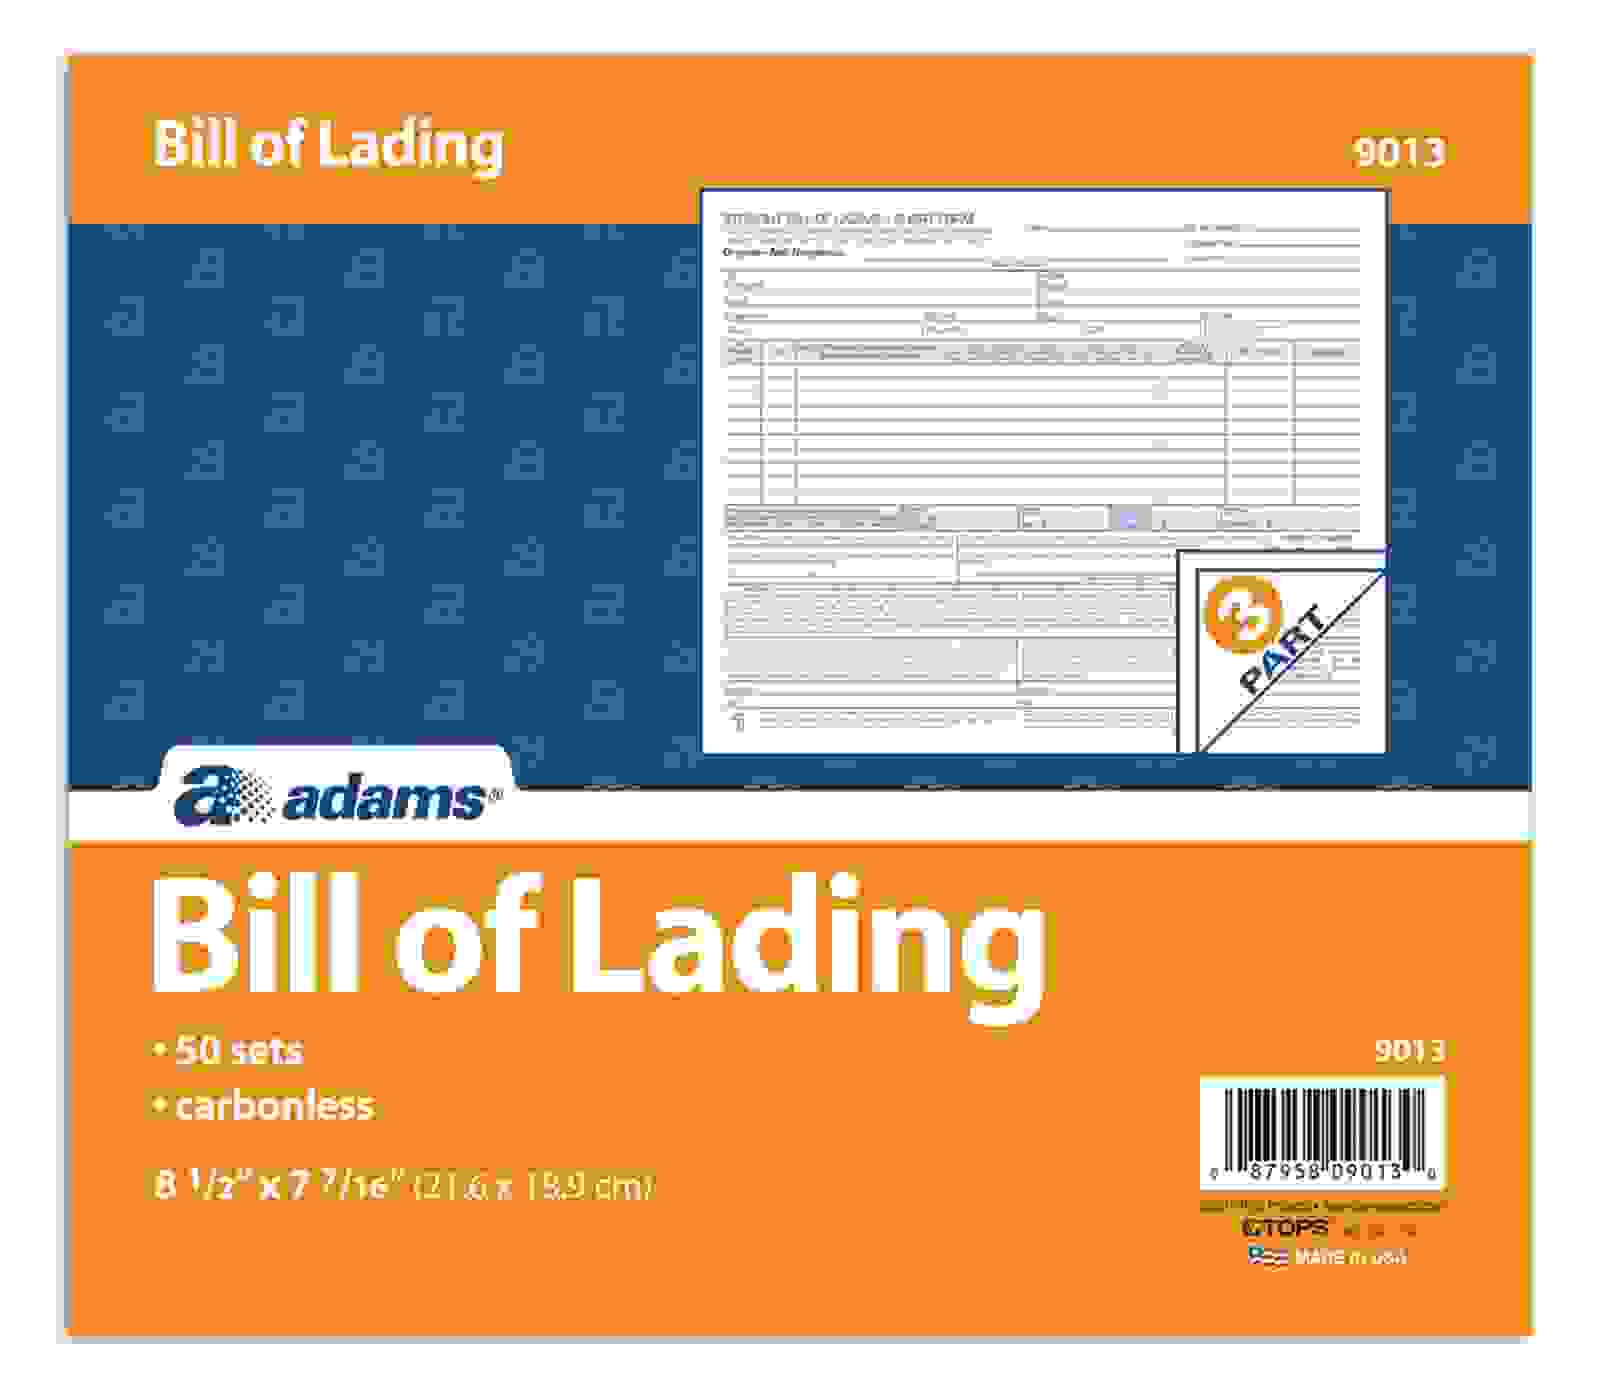 Bill of Lading Rules